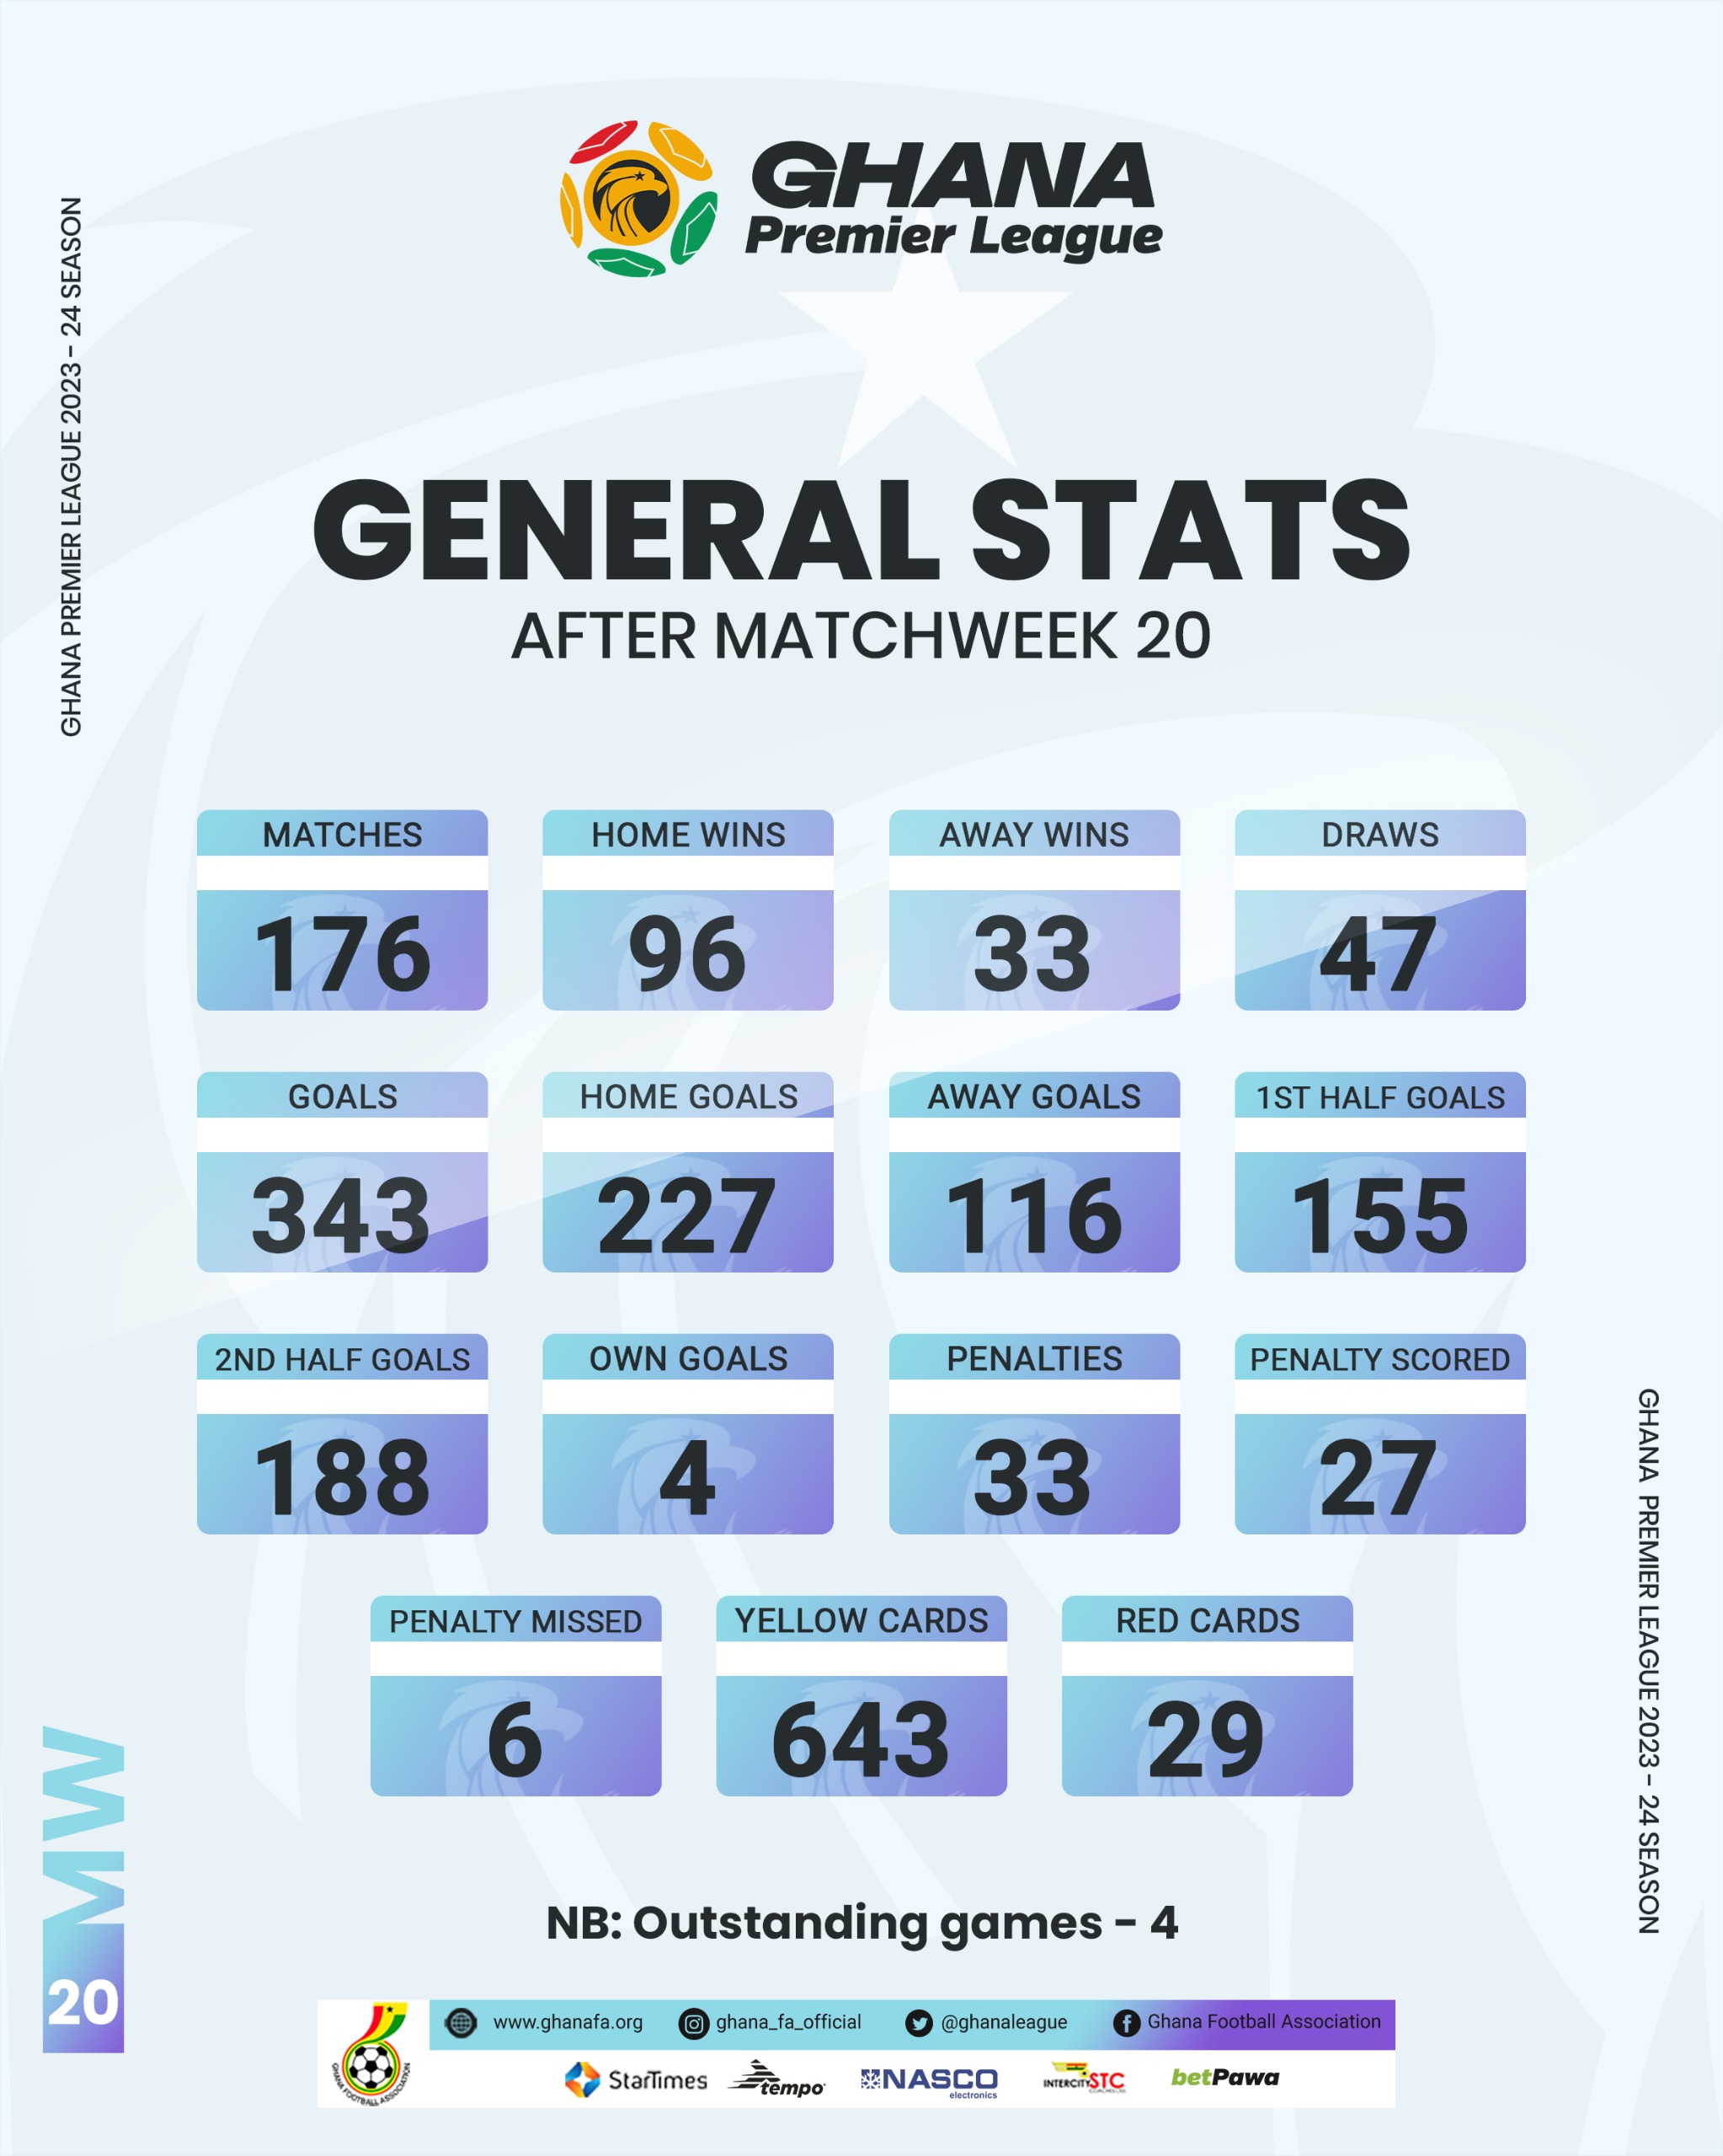 General Statistics of Ghana Premier League after Matchday 20